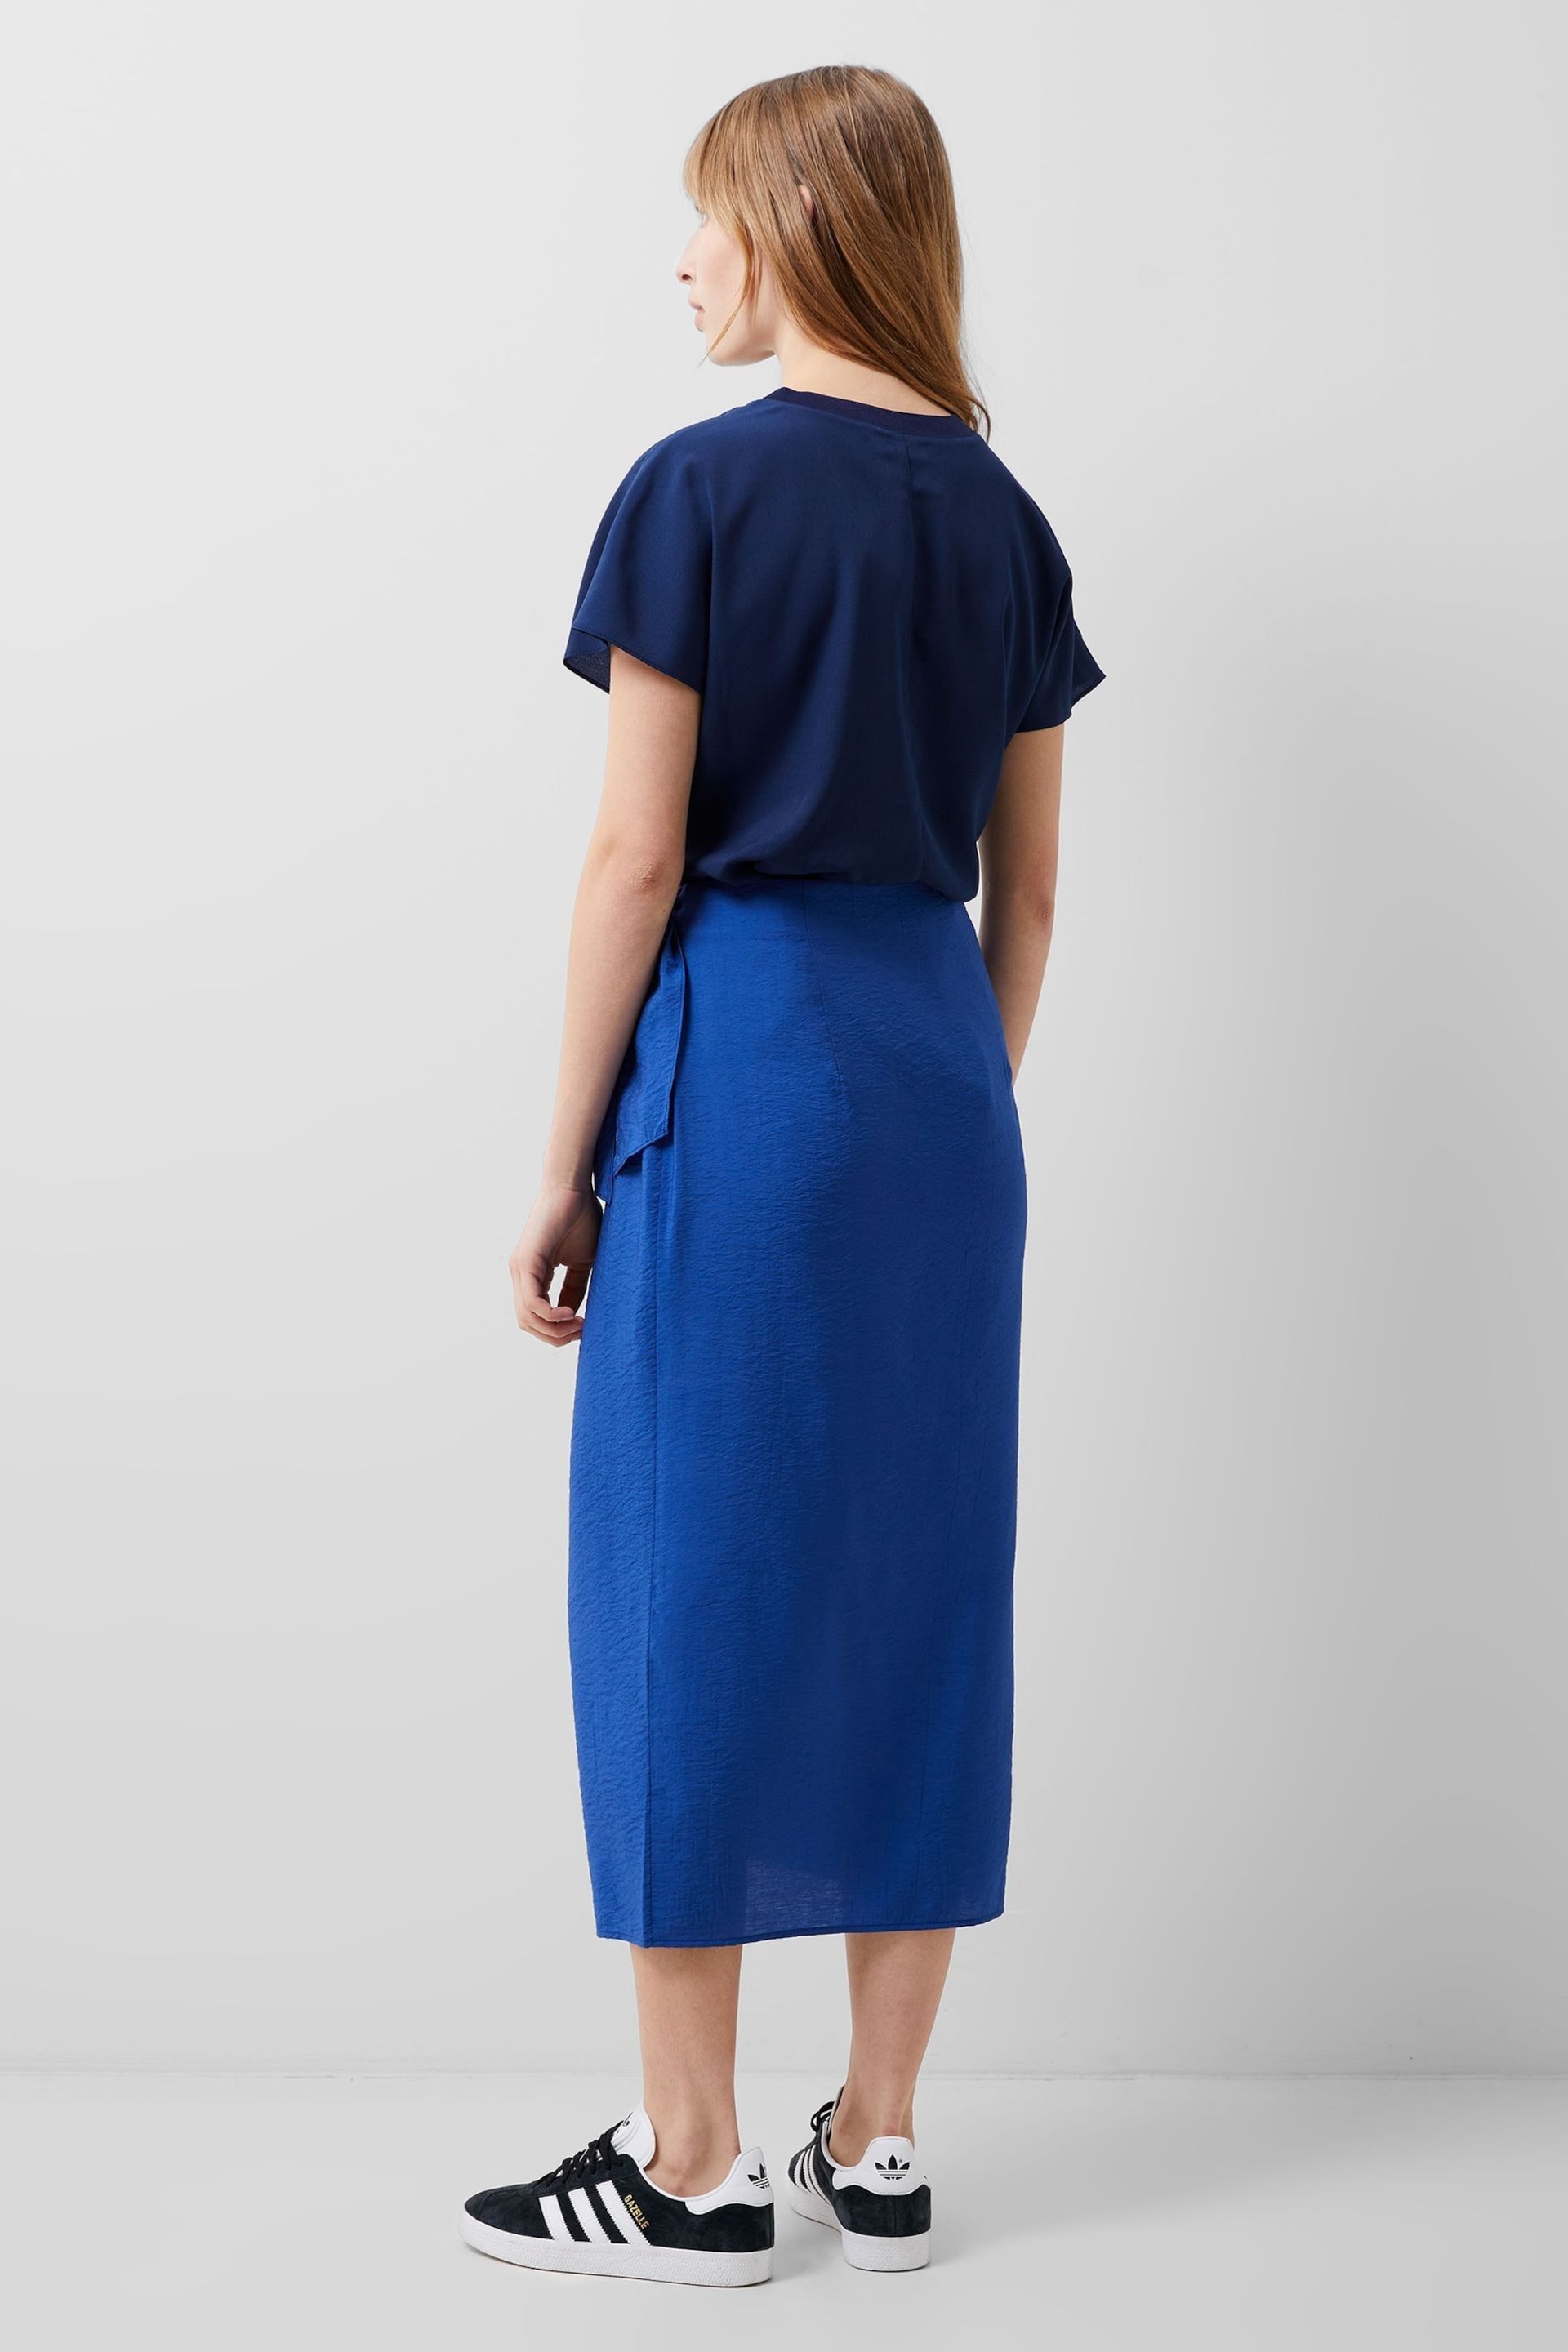 French Connection Faron Drape Skirt - Image 2 of 4